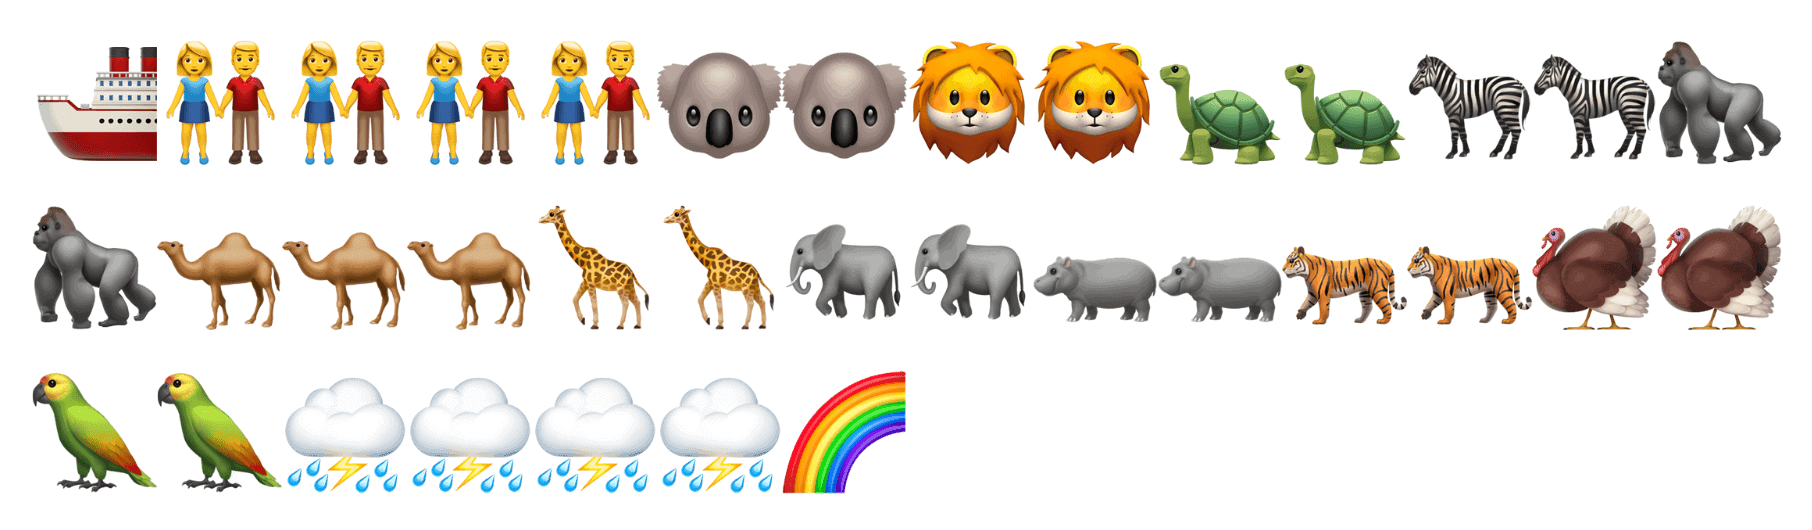 The story of the flood in emojis